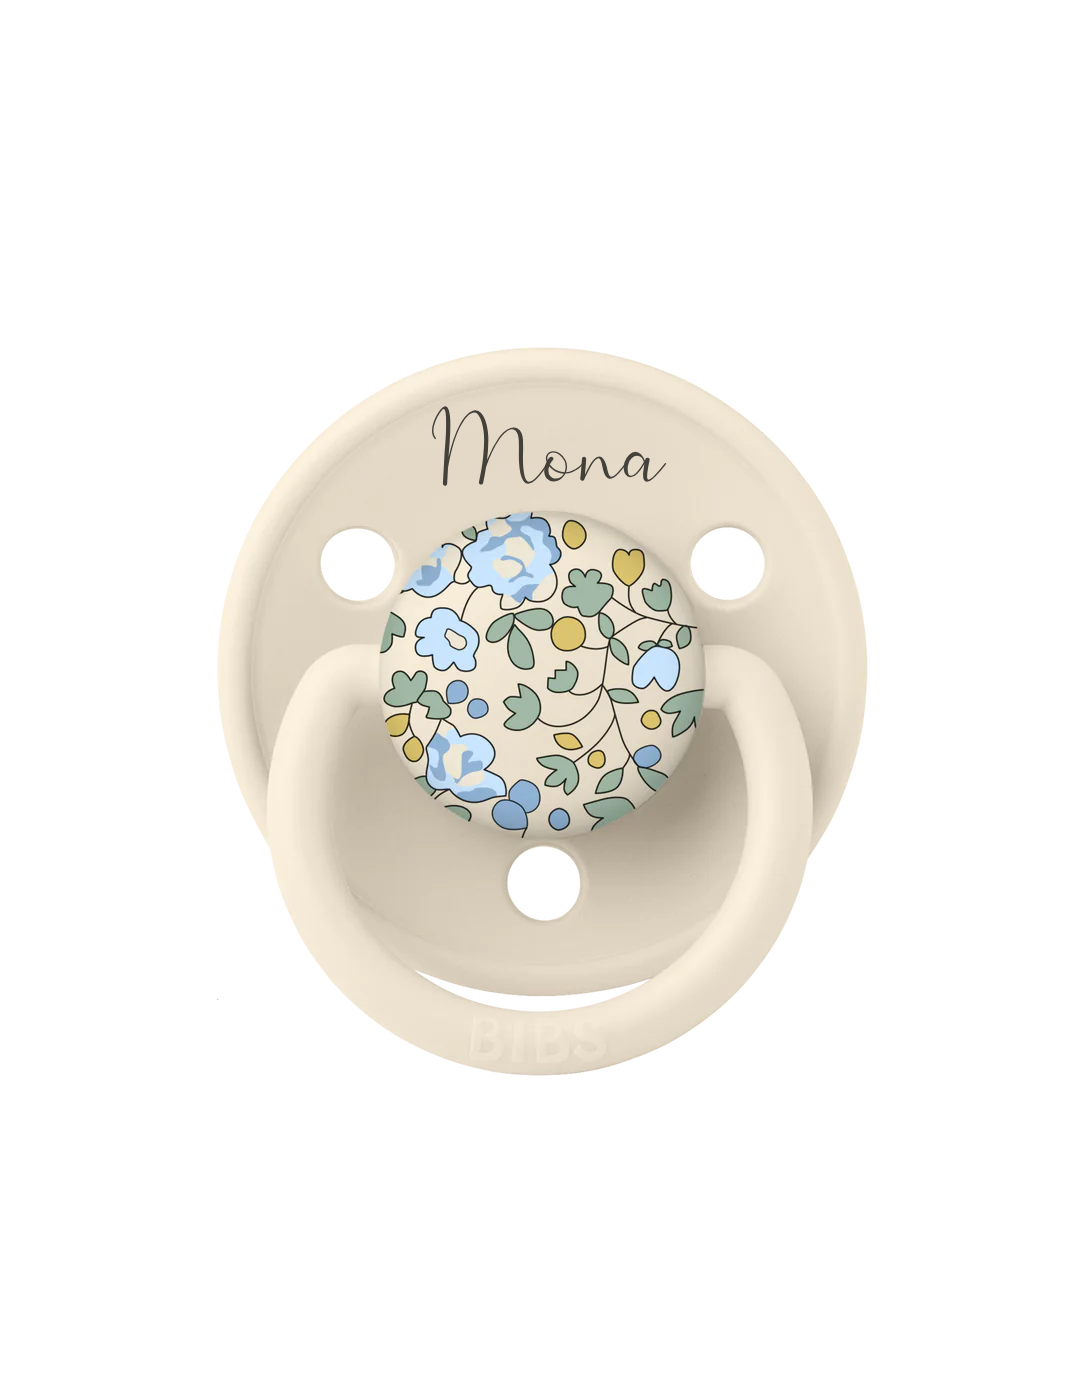 BIBS De Lux Silicone Pacifiers | One Size | Personalised in Eloise Ivory, sold by JBørn Baby Products Shop, Personalizable by JustBørn